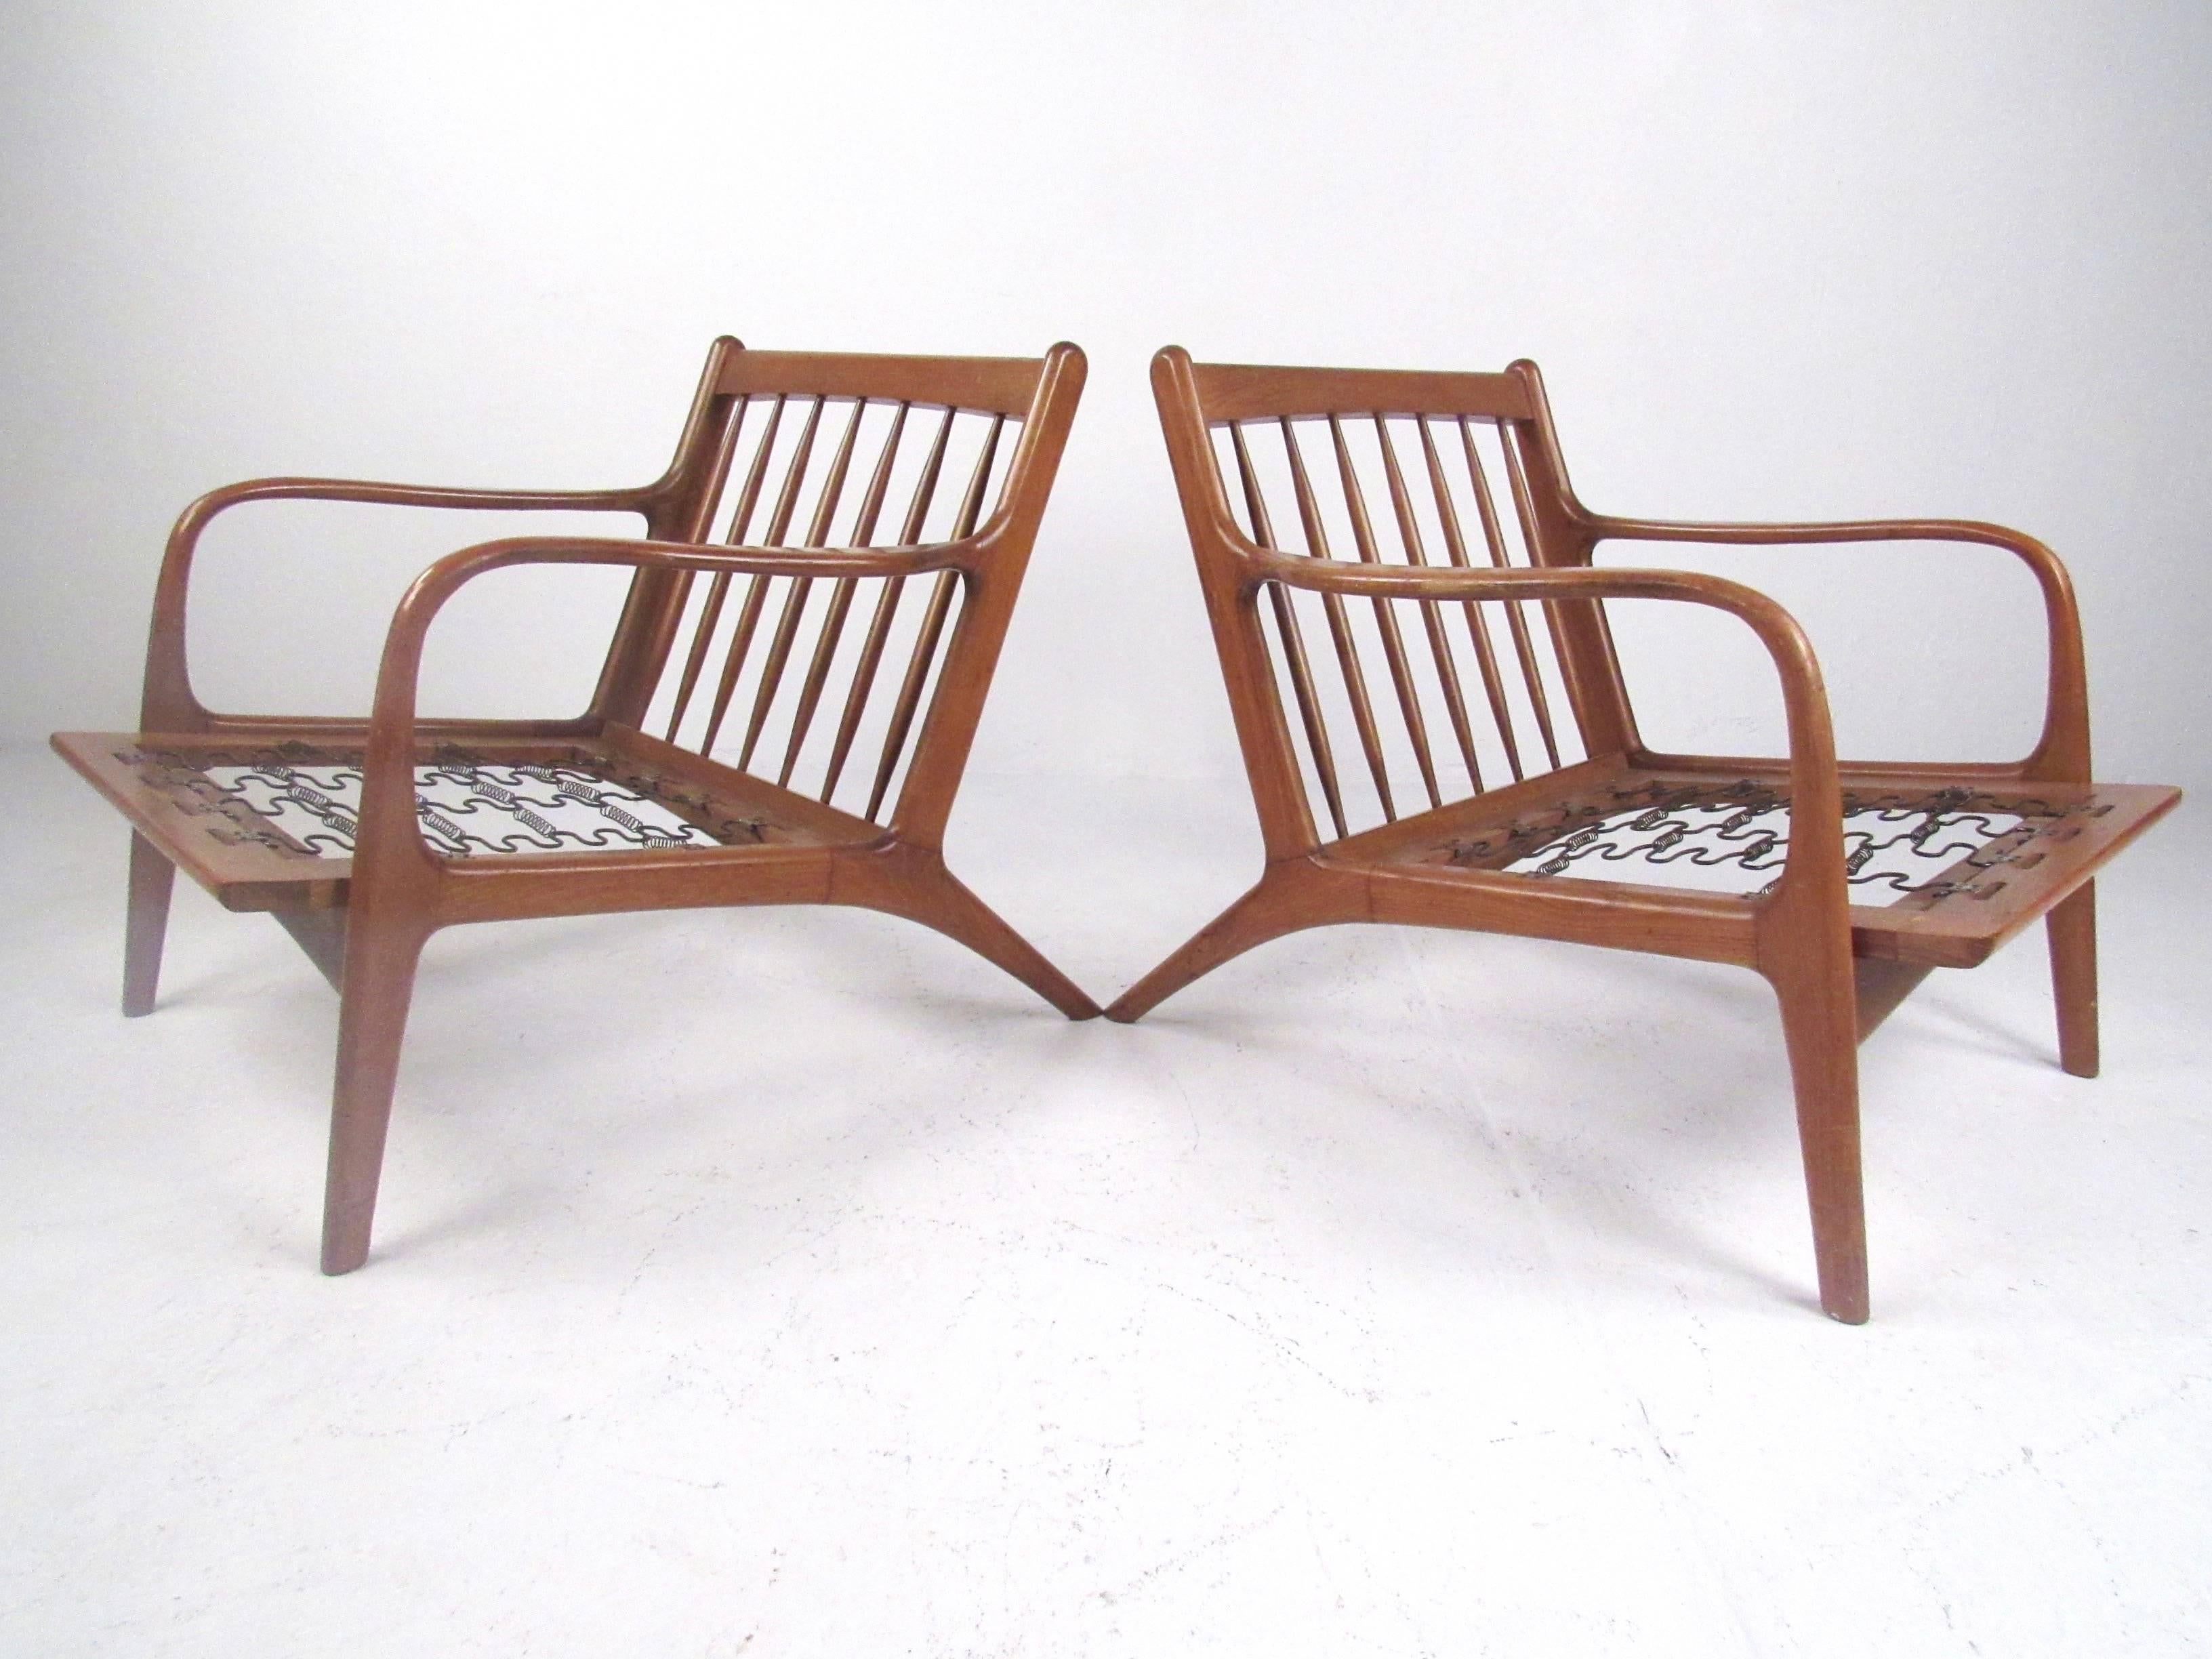 This Mid-Century pair of walnut lounge chairs features stylish Danish modern design with serpentine spring upholstery. Unique pair features the vintage style of Folke Ohlsson and makes a beautiful addition to any interior. Please confirm item